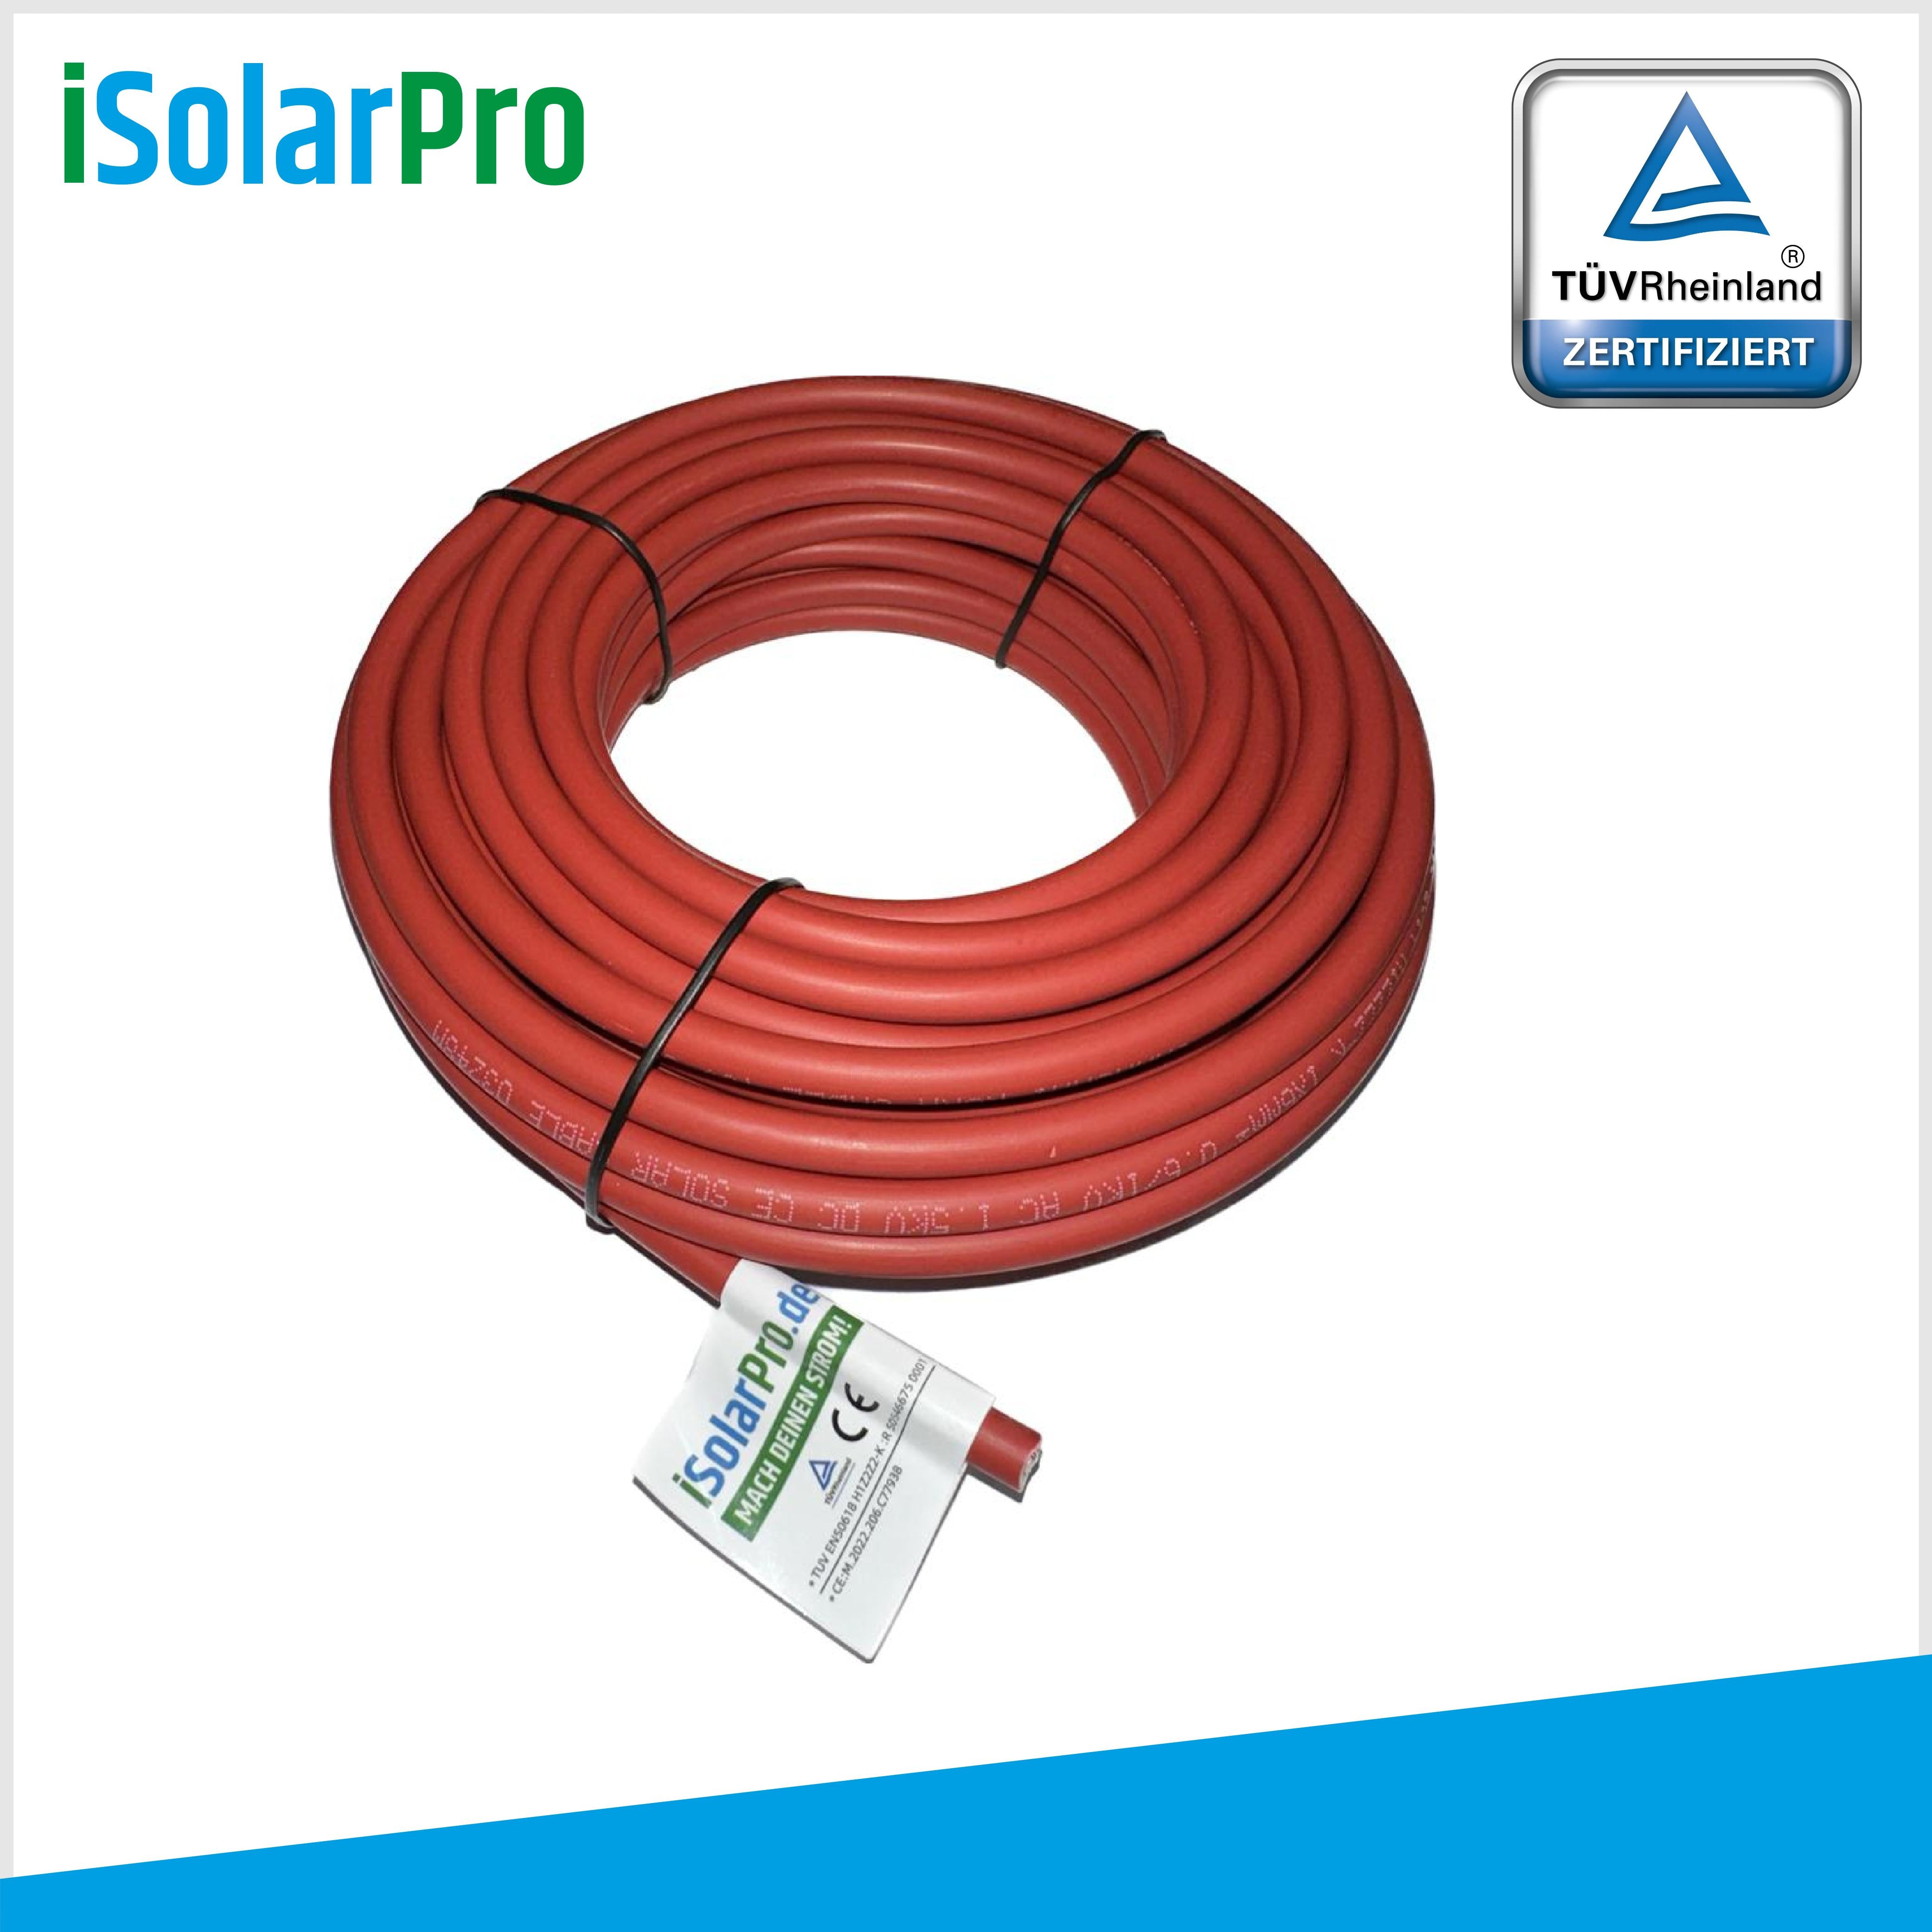 10m solar cable 6 mm² photovoltaic cable for PV systems red